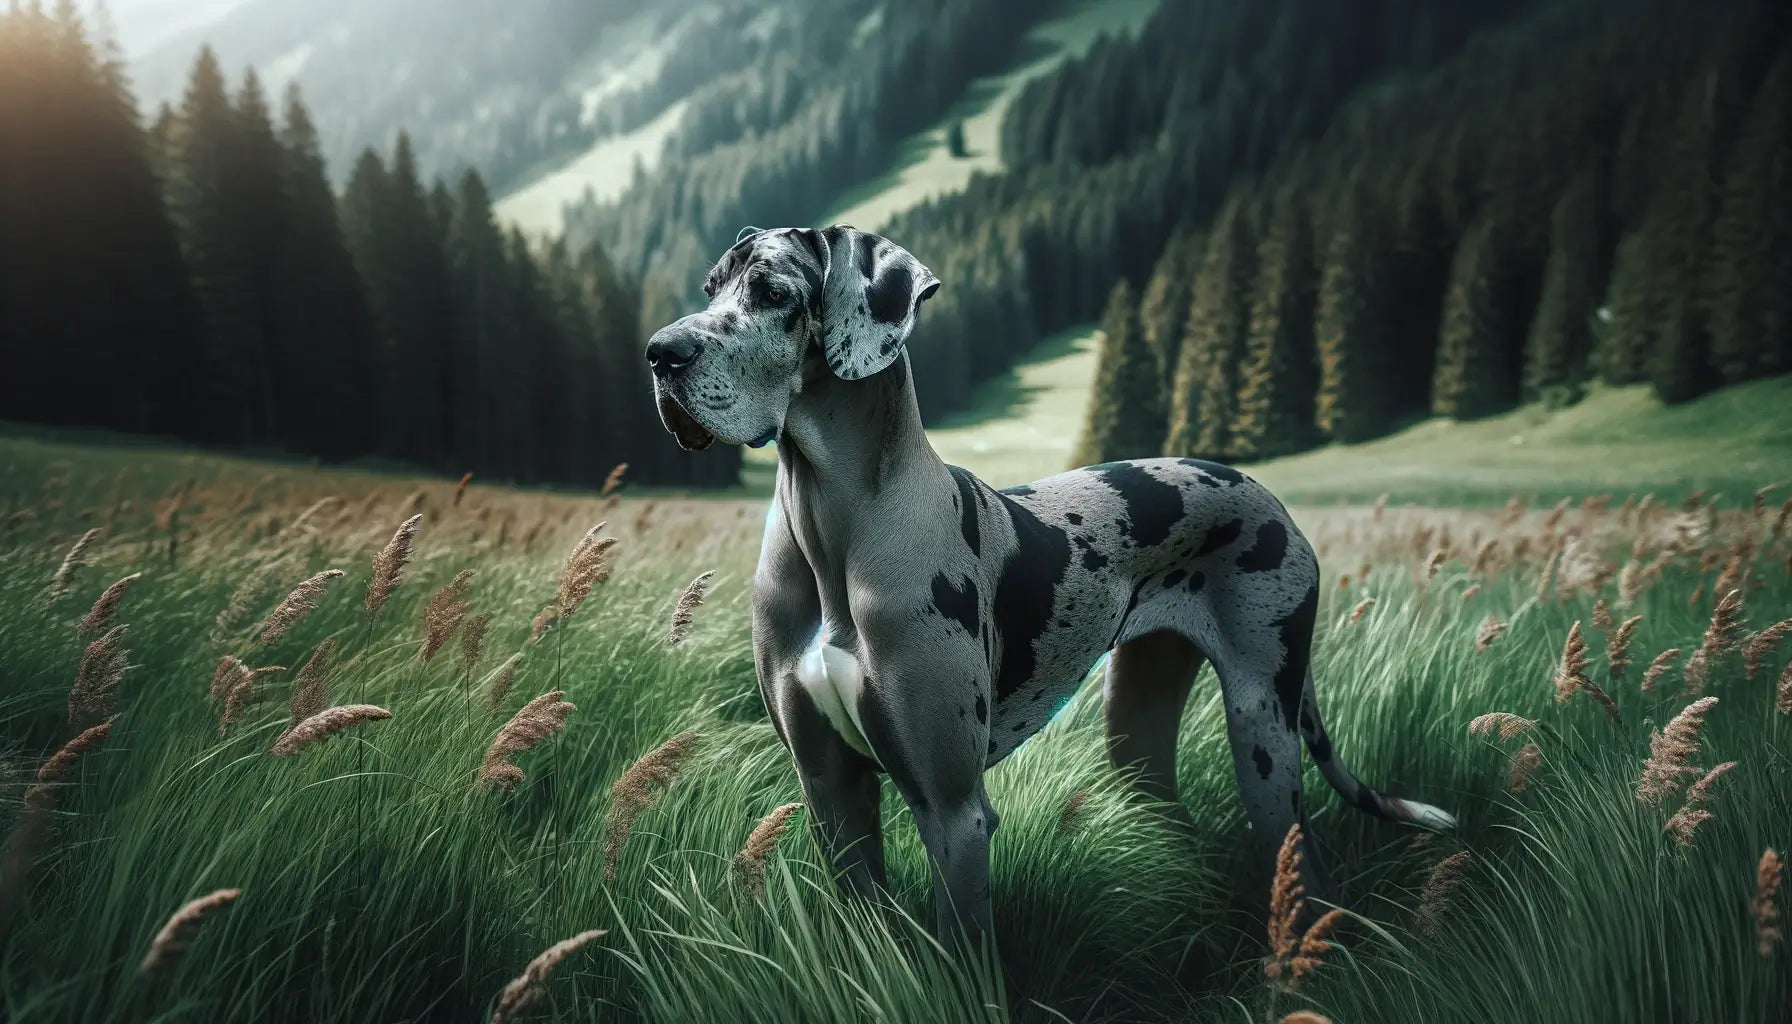 A Merle Great Dane in a grassy field, possibly mistaken for a different breed, showcasing its unique merle coat and distinctive physical features.